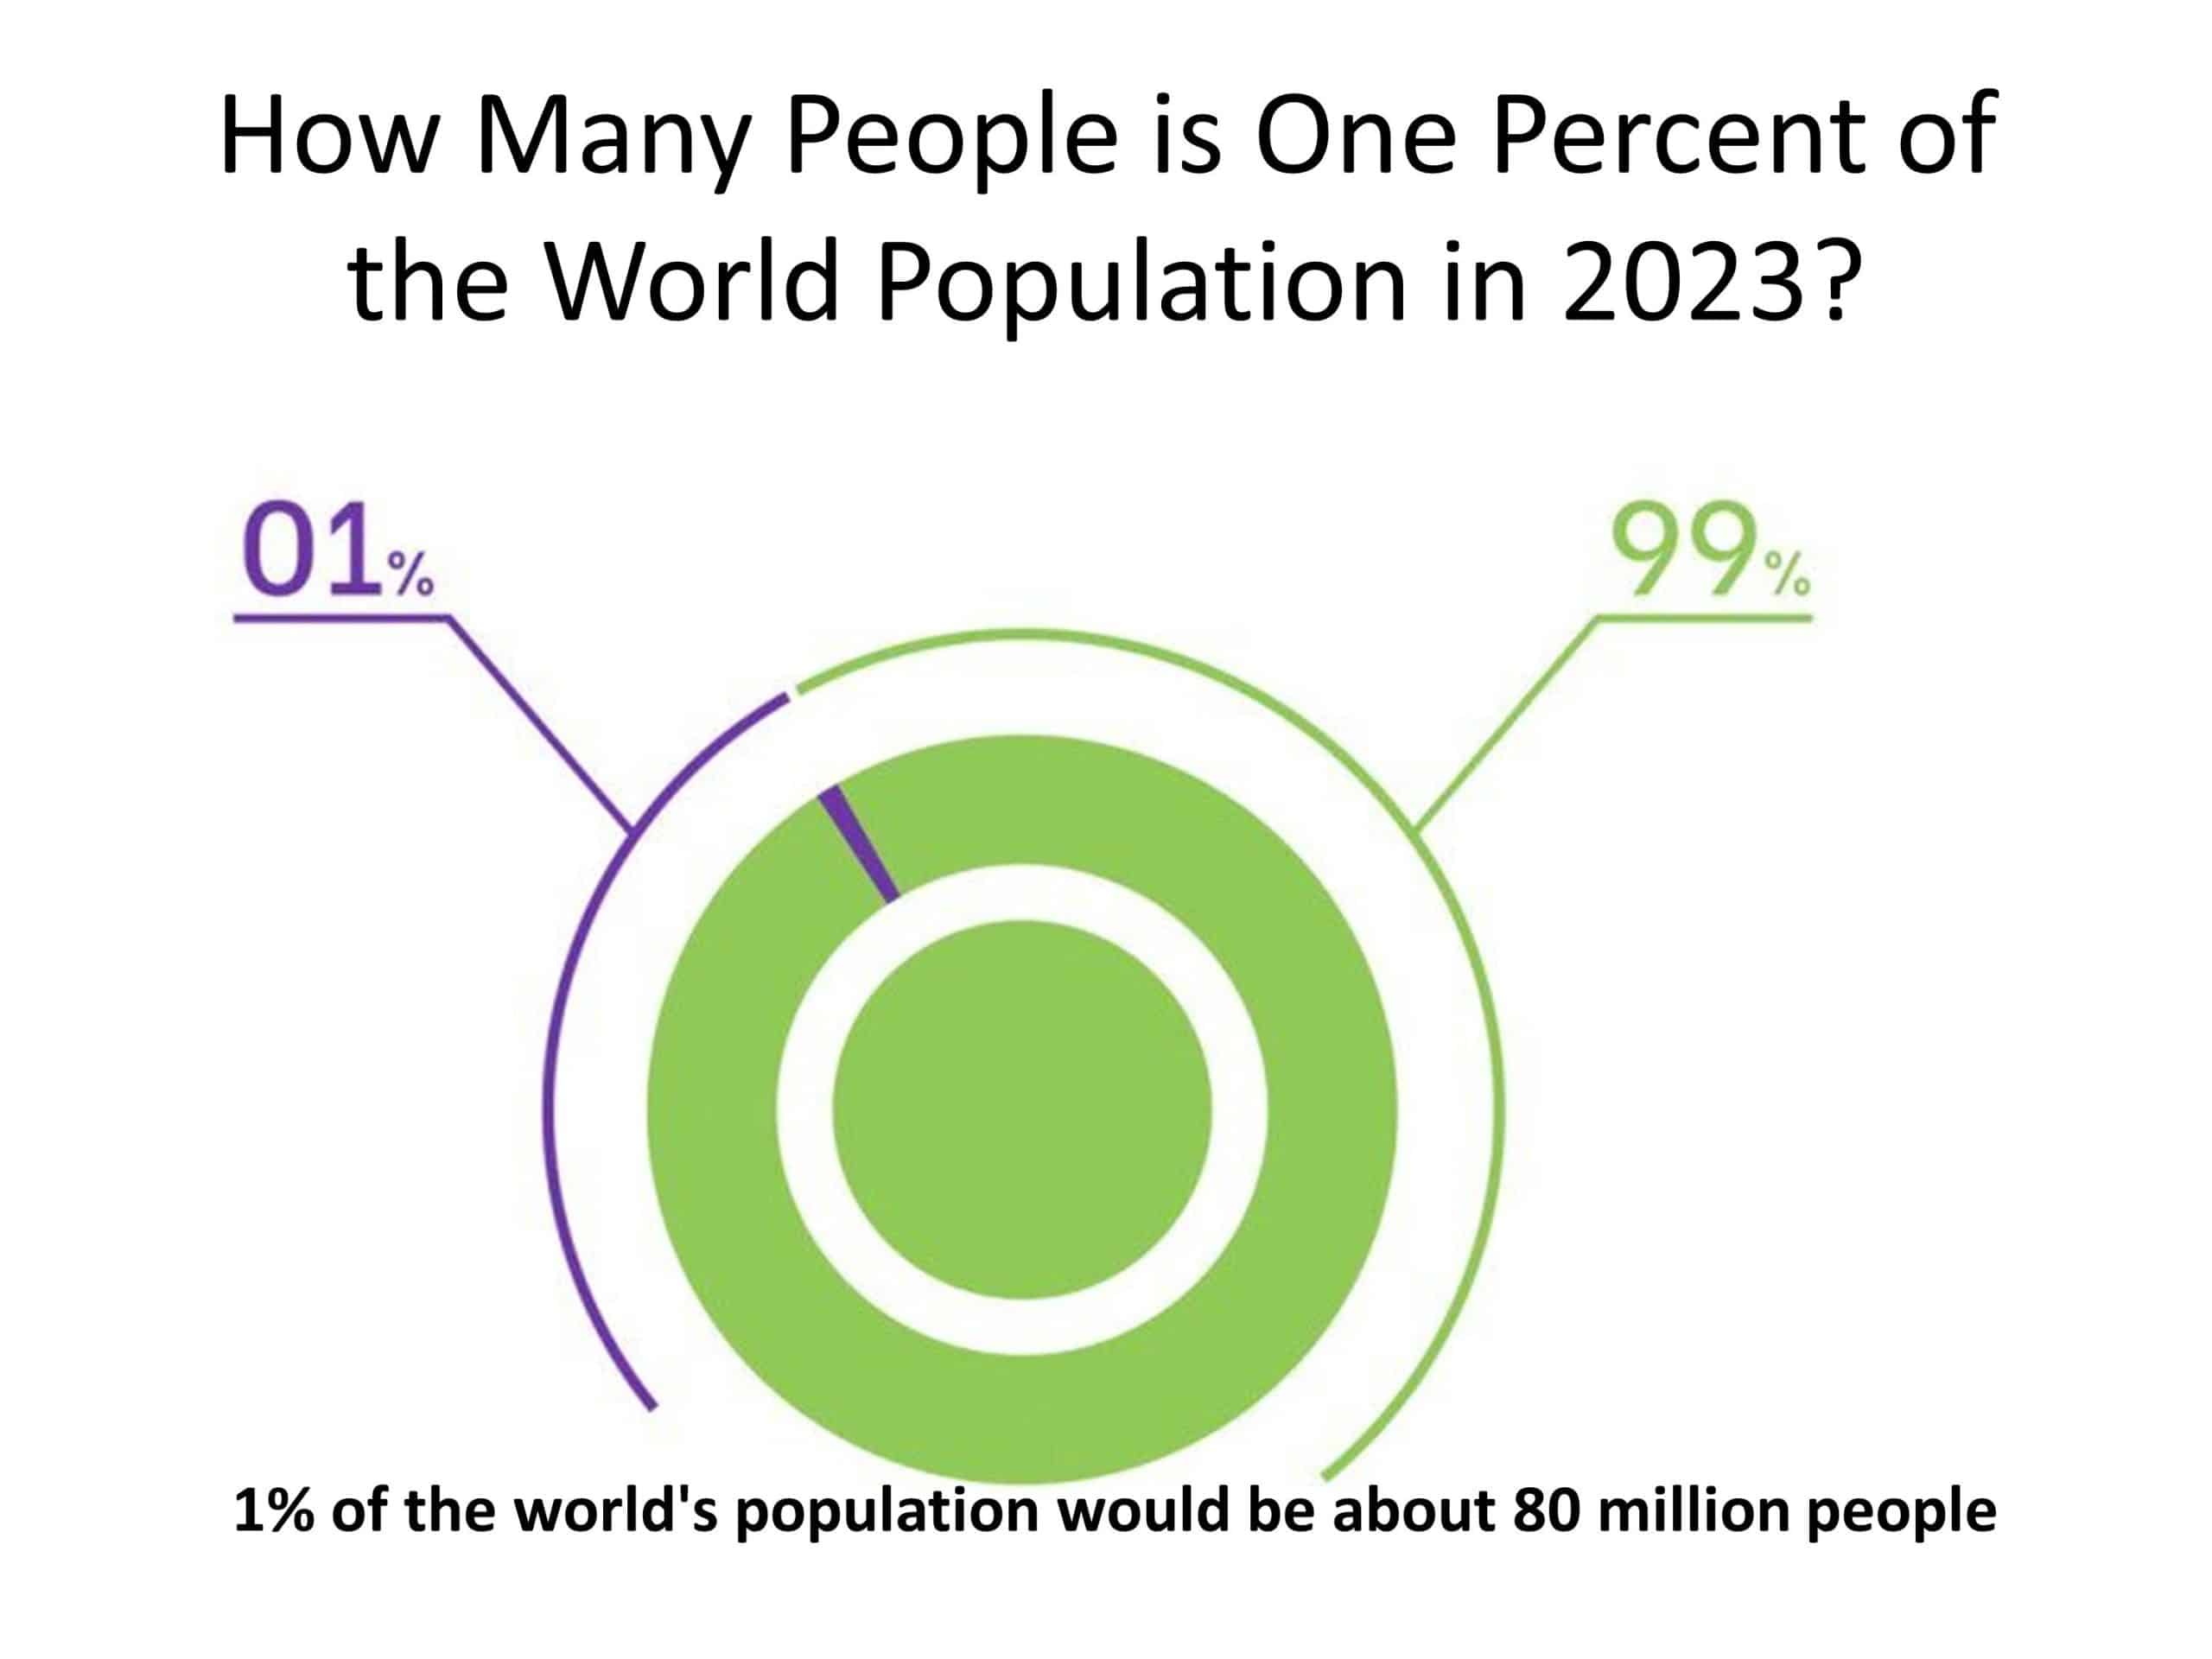 1% of the world's population would be about 80 million people